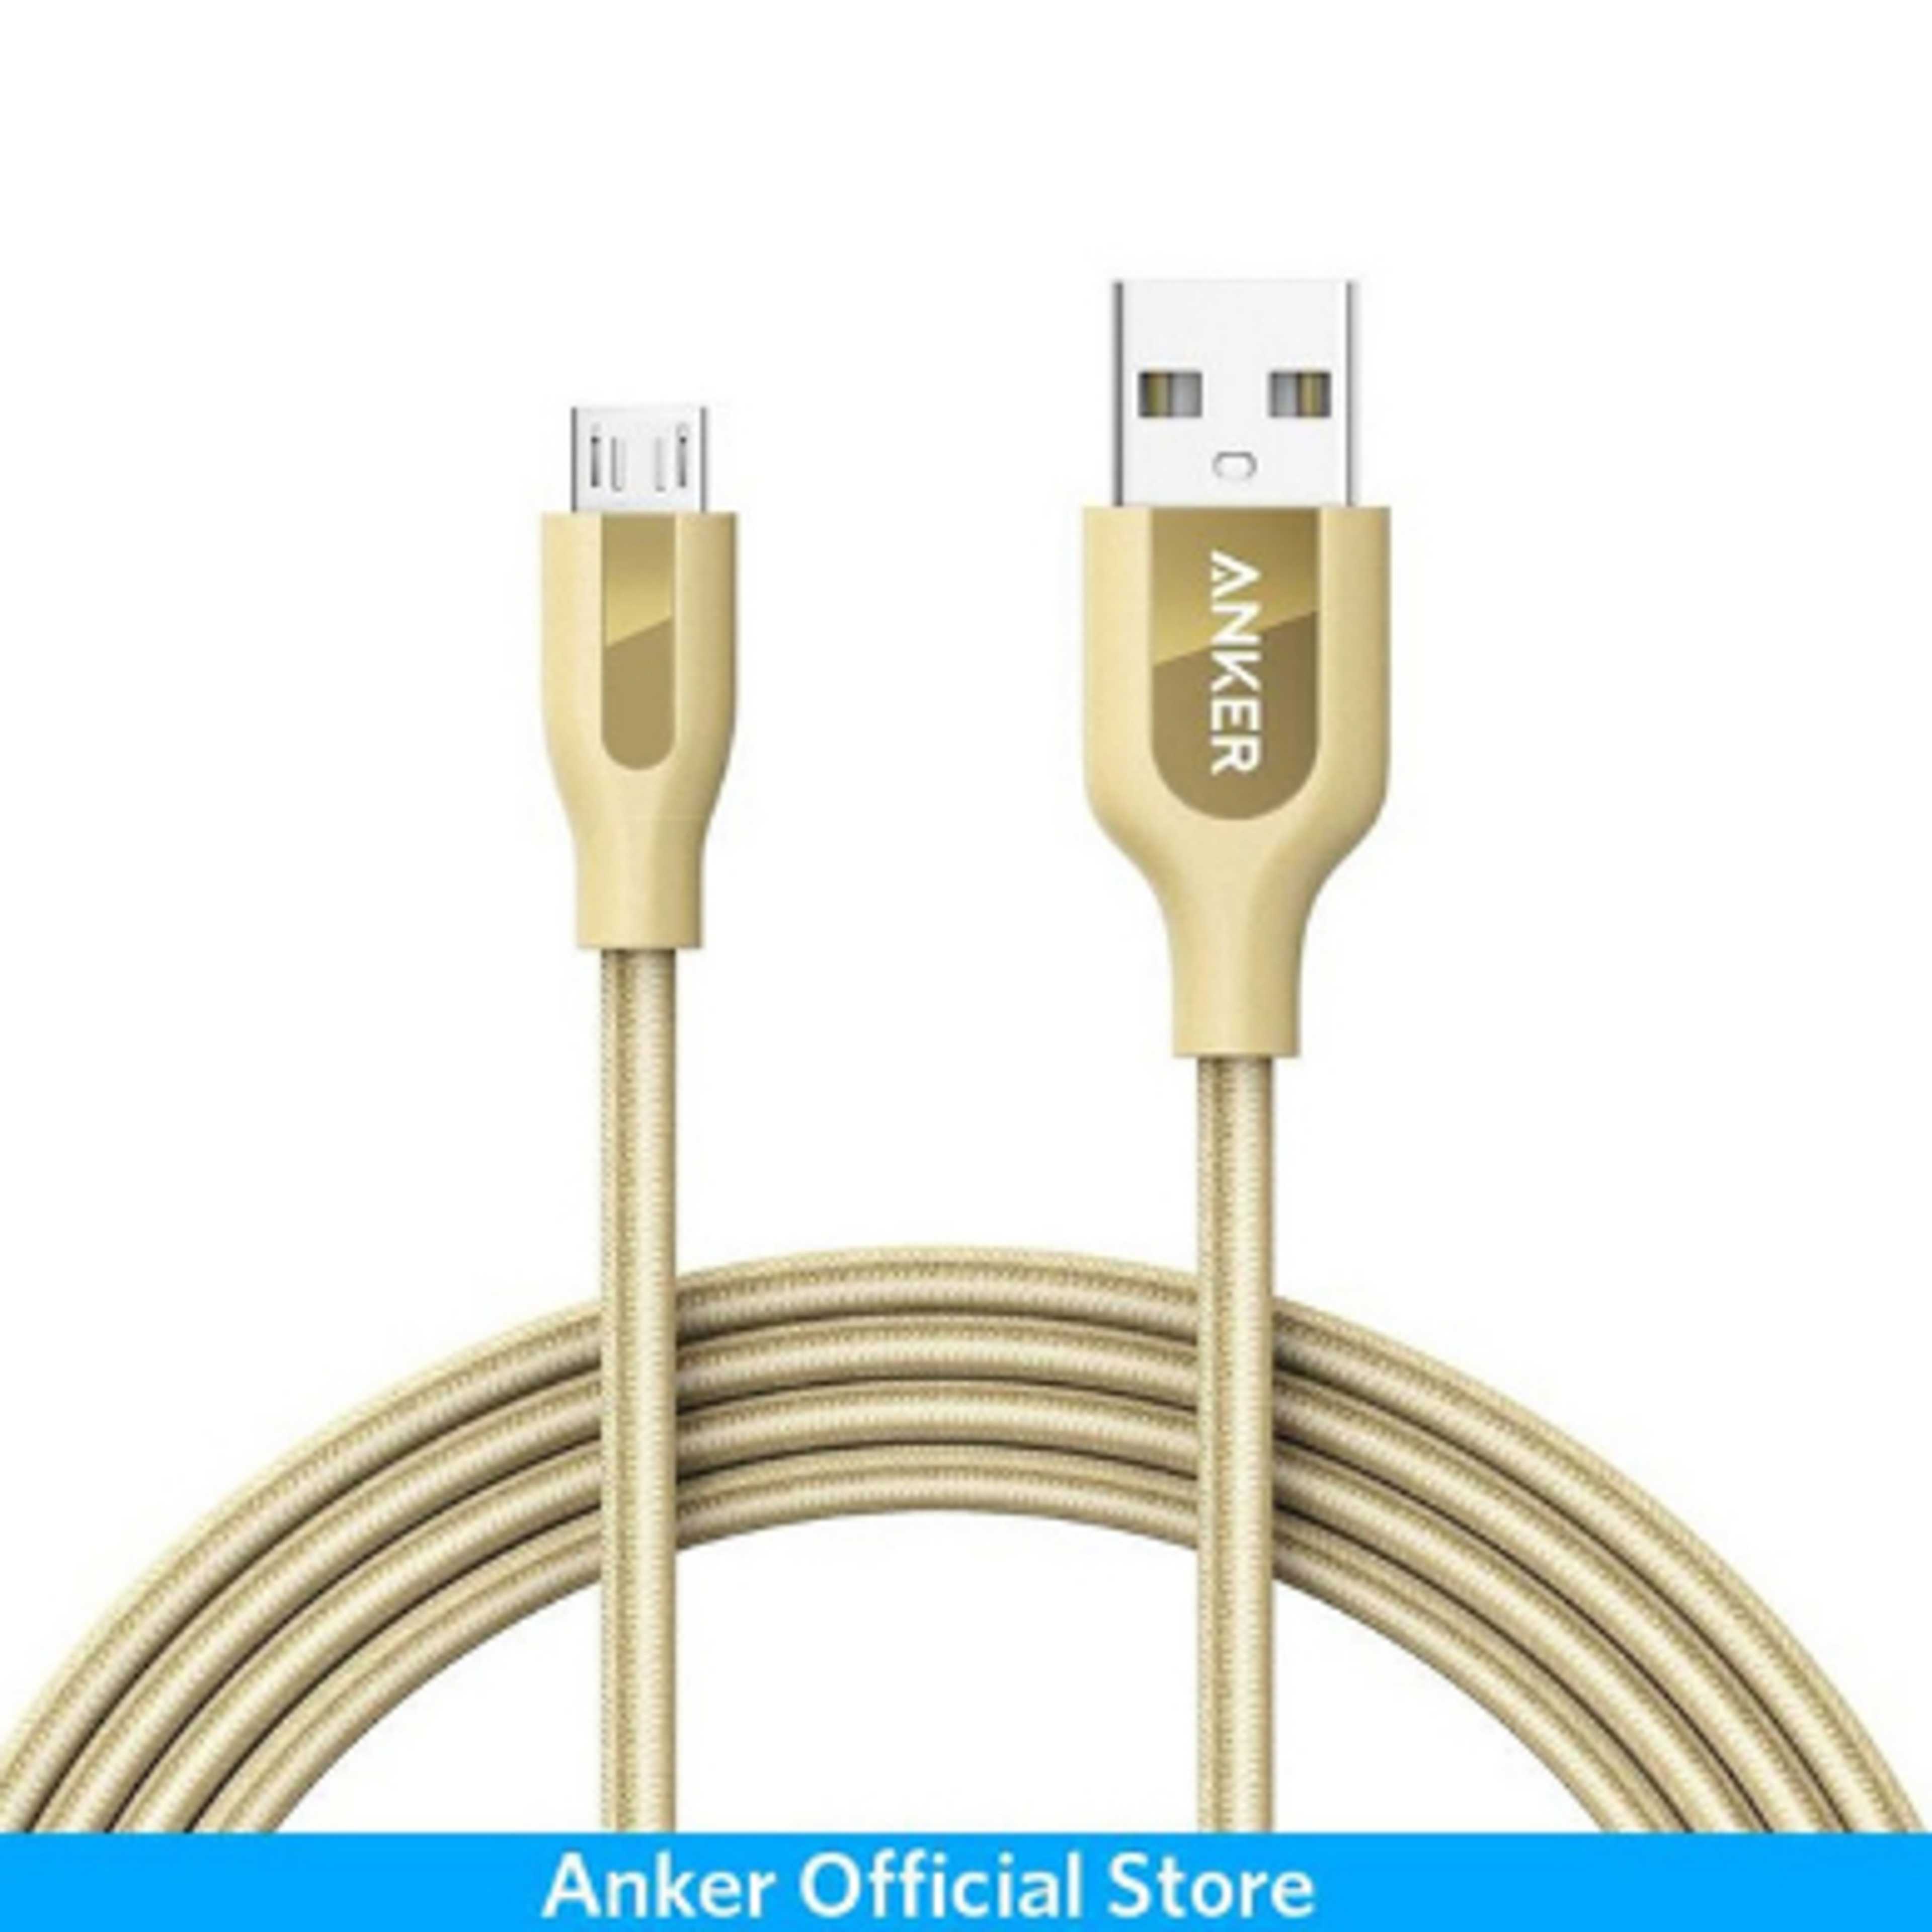 Anker A8143HB1 - PowerLine+ Micro USB 6ft